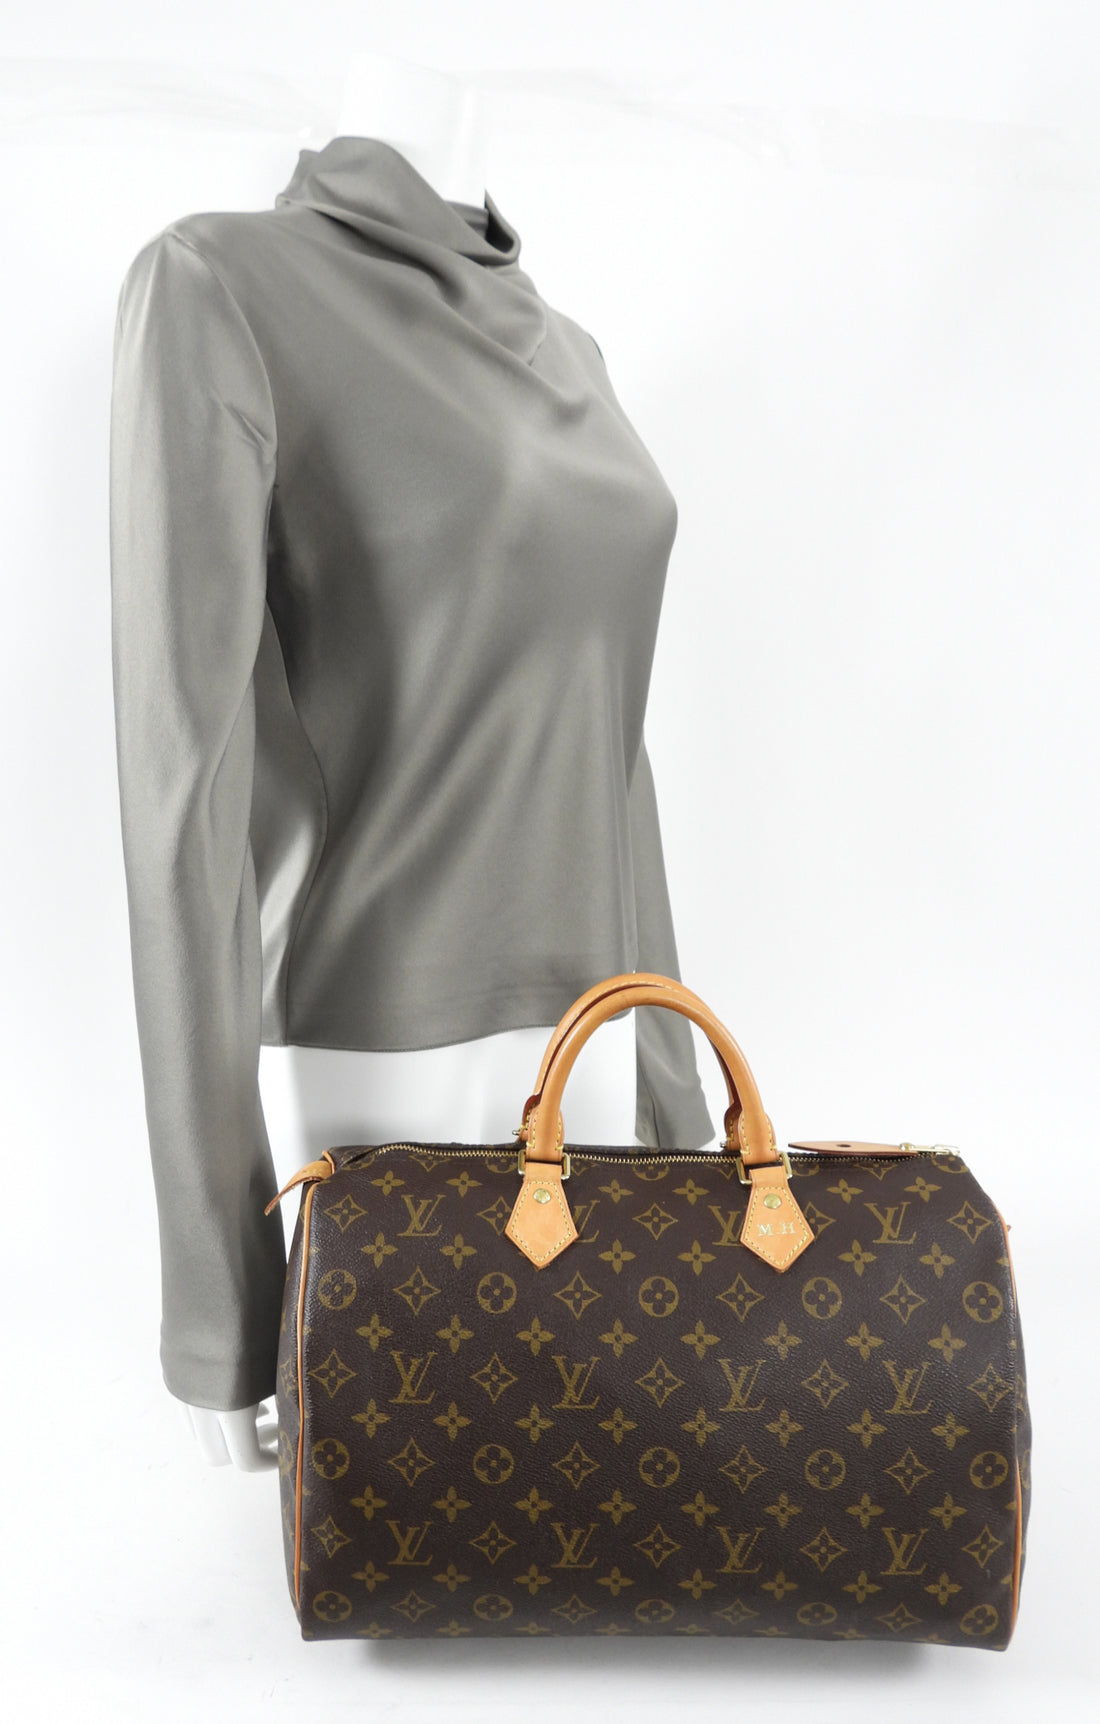 Solved 35. Louis Vuitton Moët Hennessy (LVMH), the